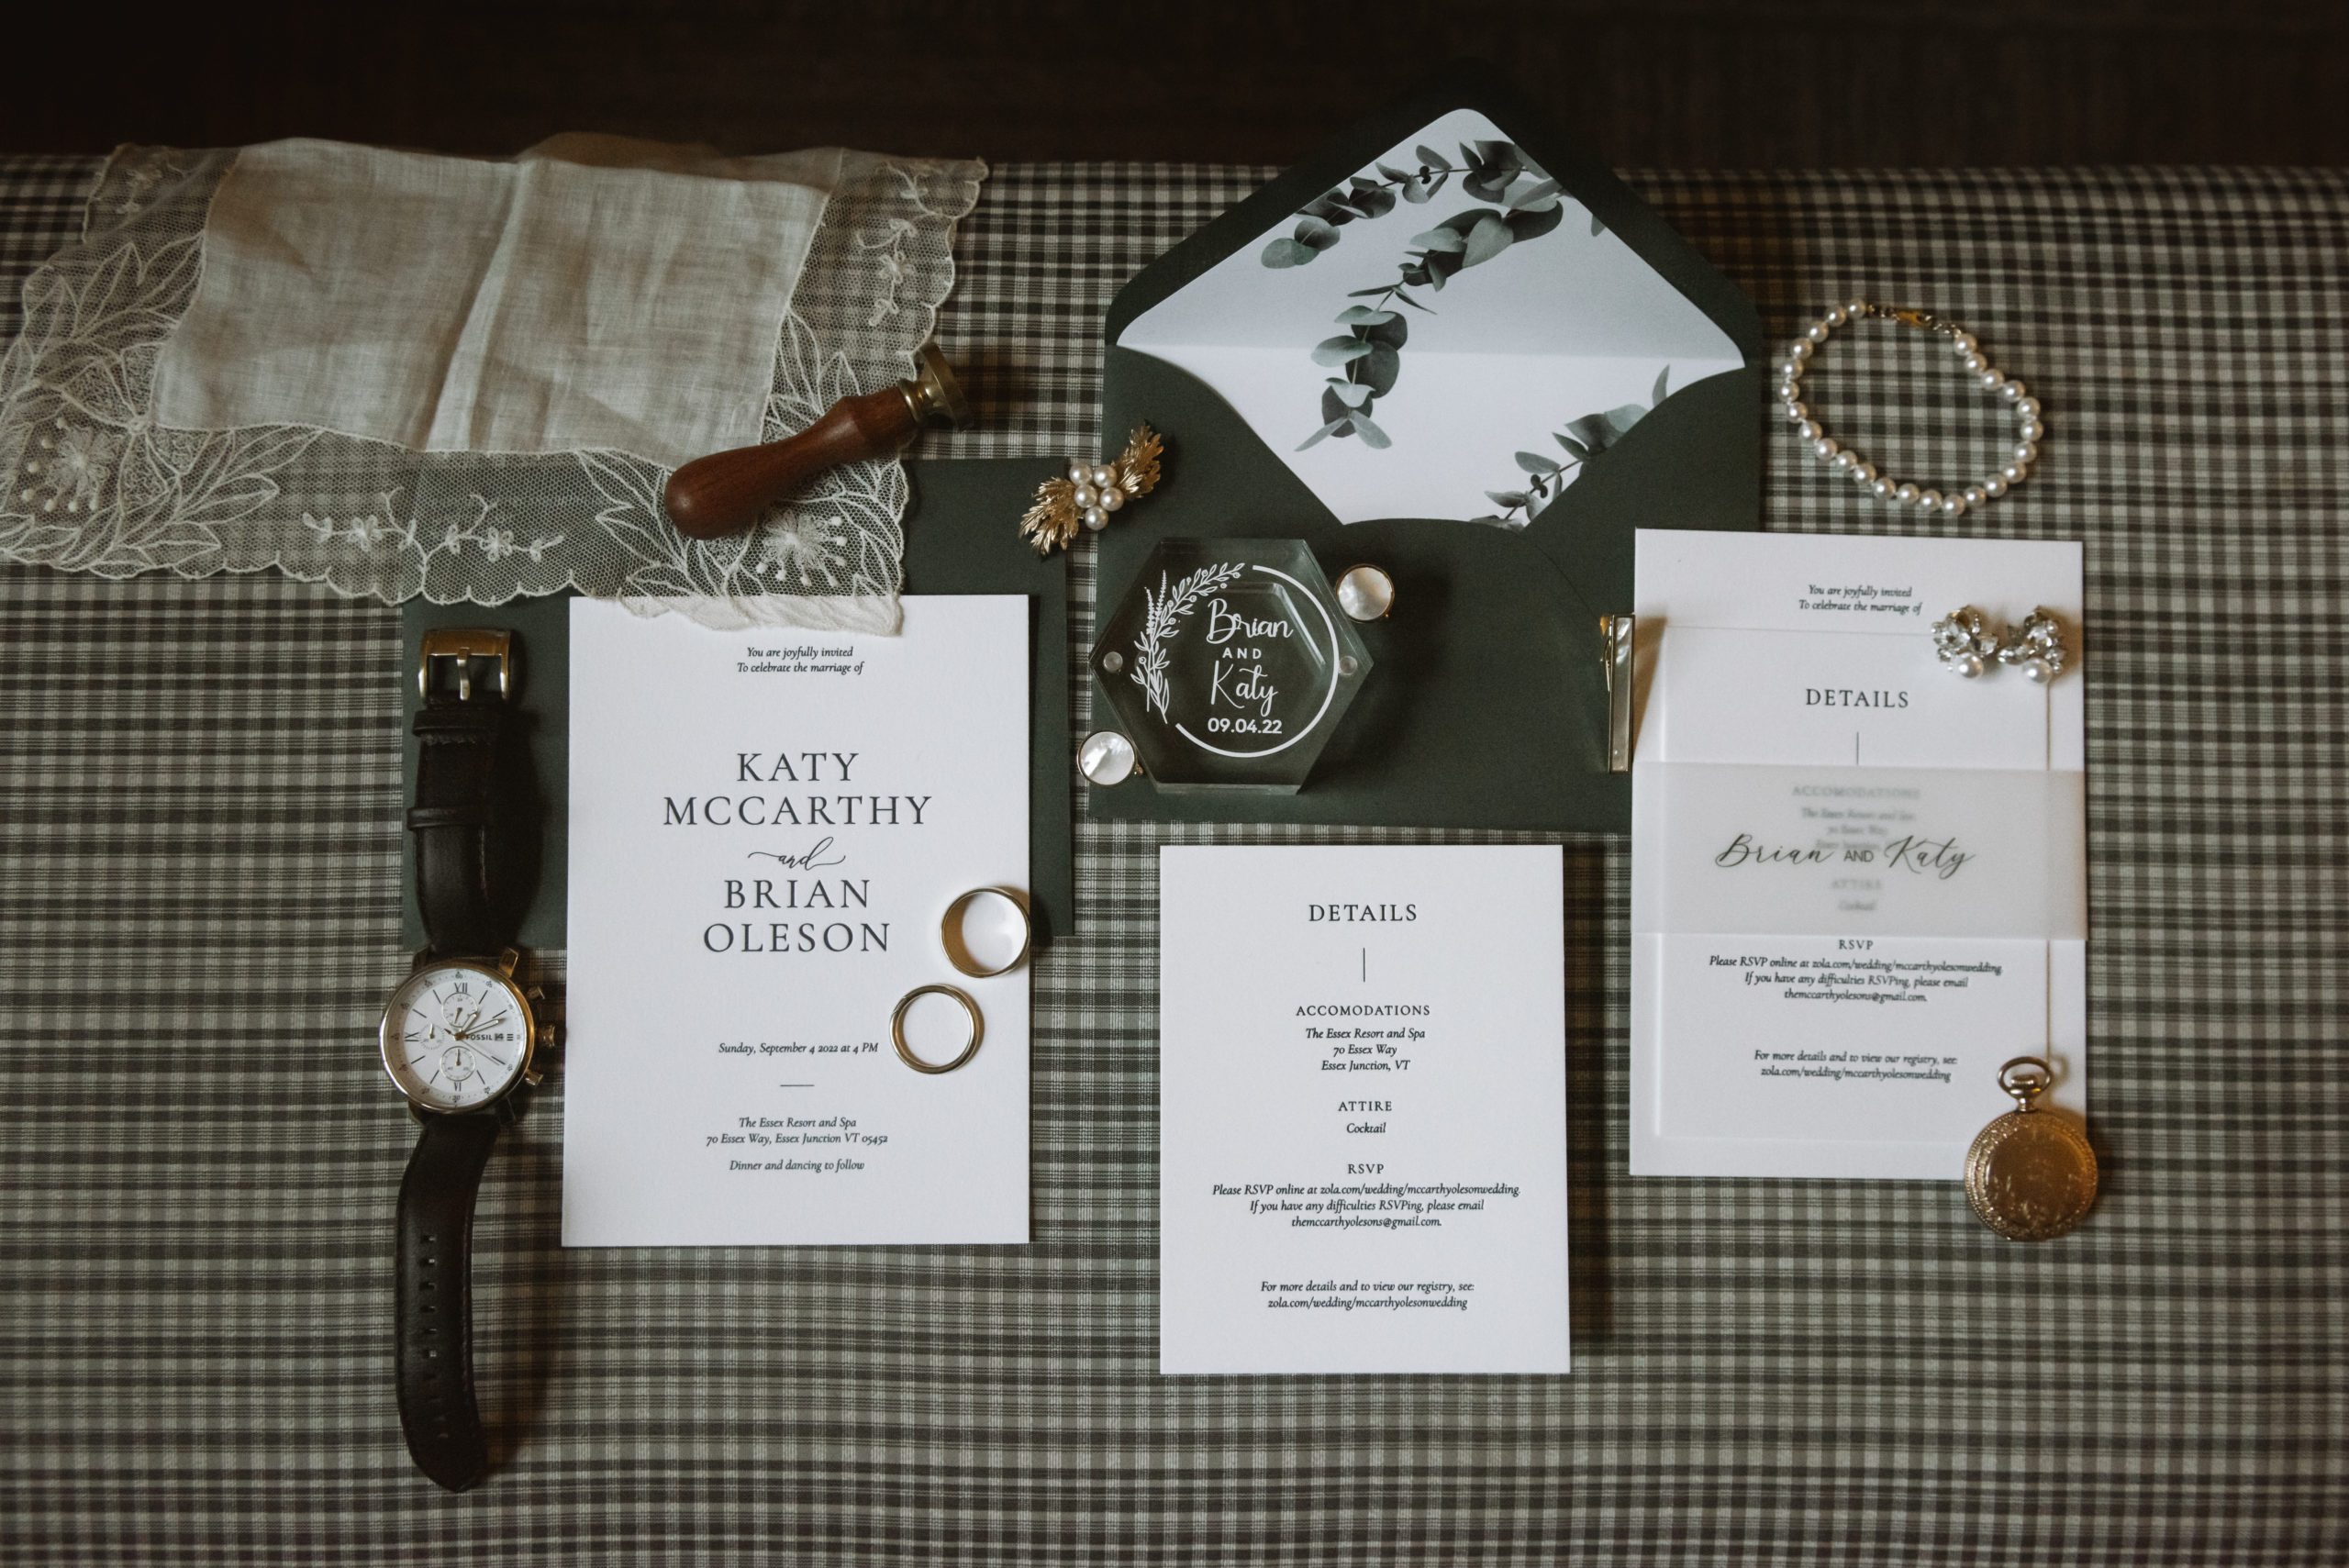 Lay flat of the couple's dark green stationery. Included is the invitation, detail card, envelopes, and the bride and groom's details like jewelry, rings, and lace handkerchief. Everything is set atop a green, black, and white gingham ottoman.